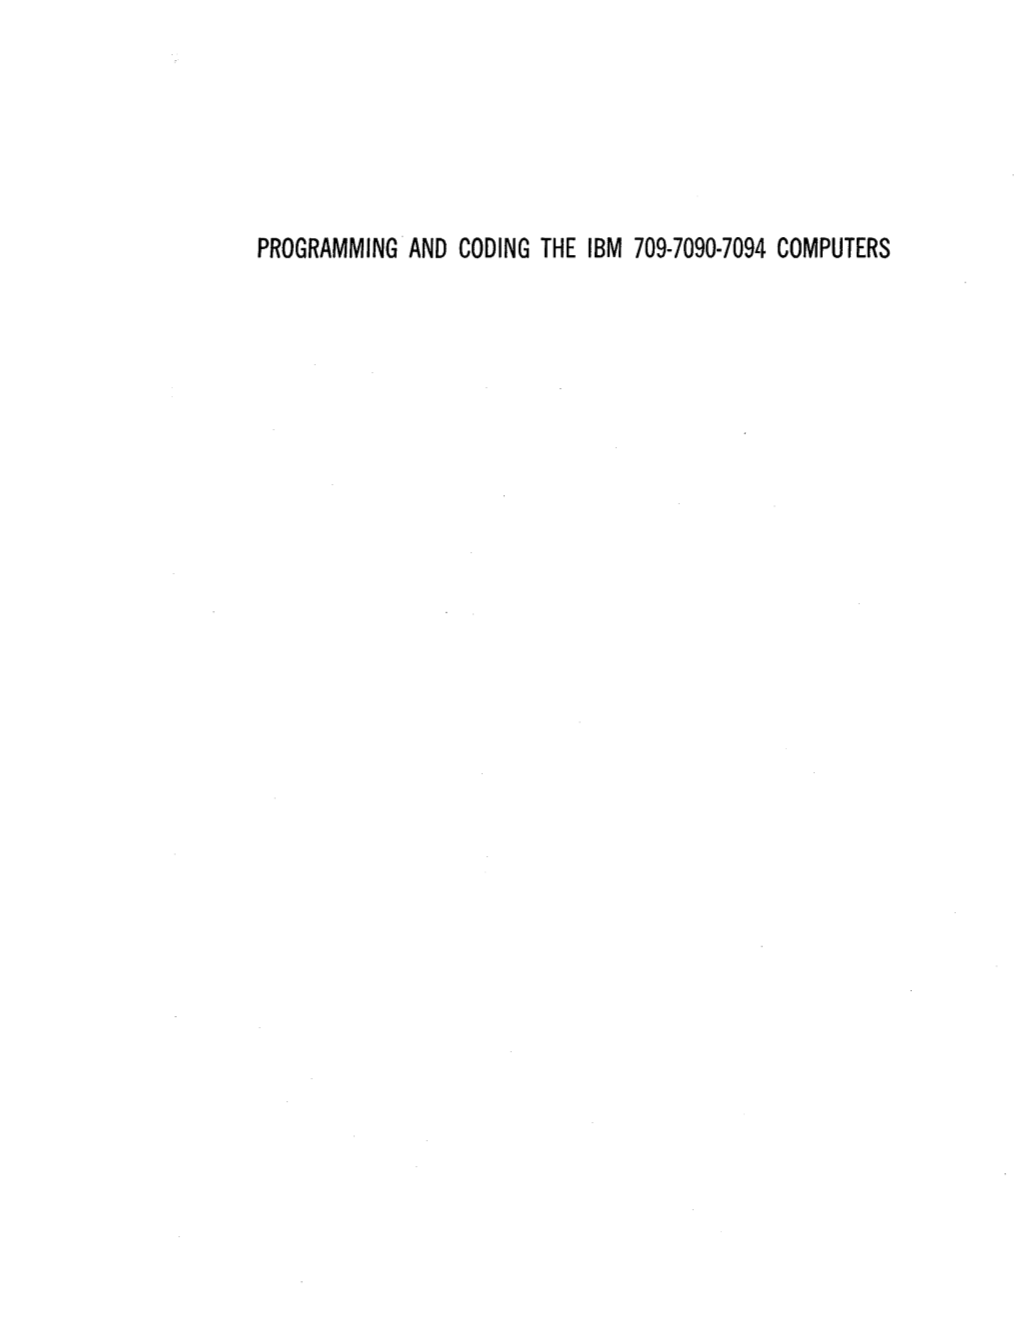 Programming and Coding the Ibm 709-7090-7094 Computers